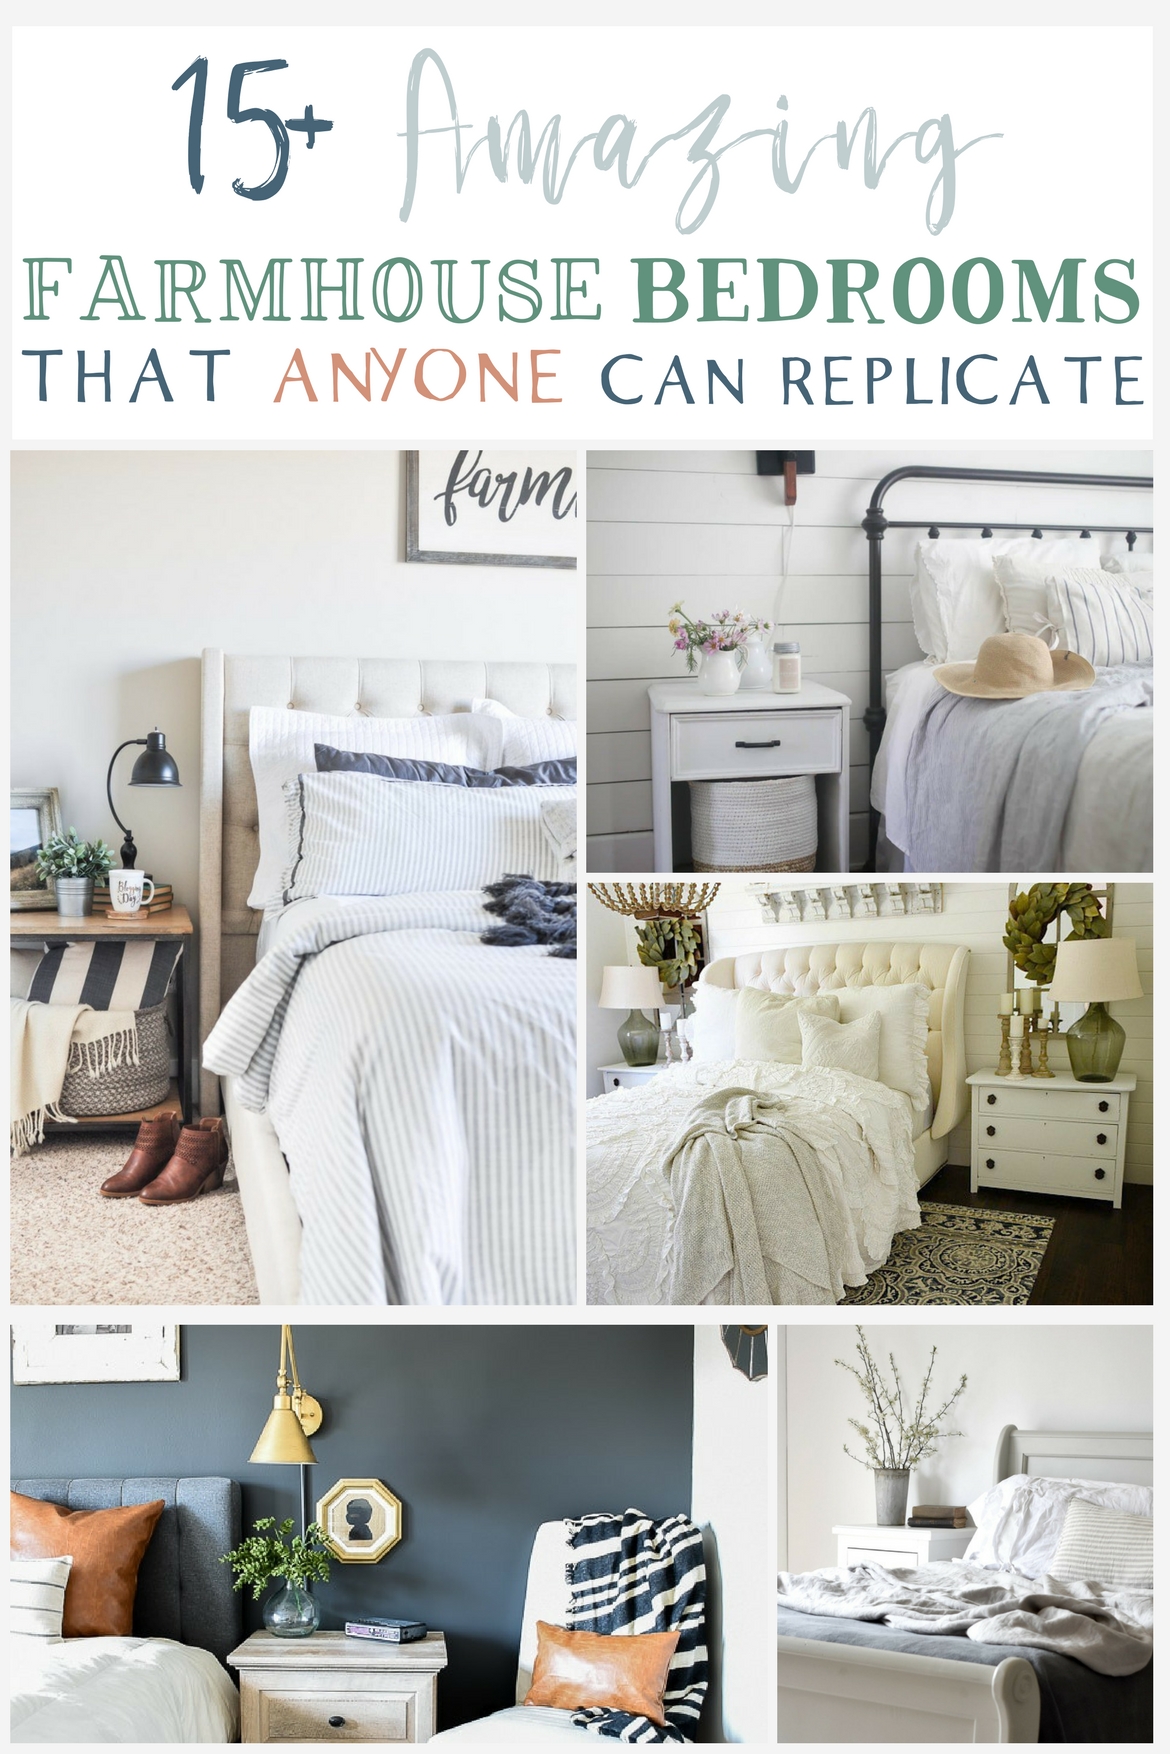 15 Farmhouse Bedroom Ideas Anyone Can Replicate The Weathered Fox